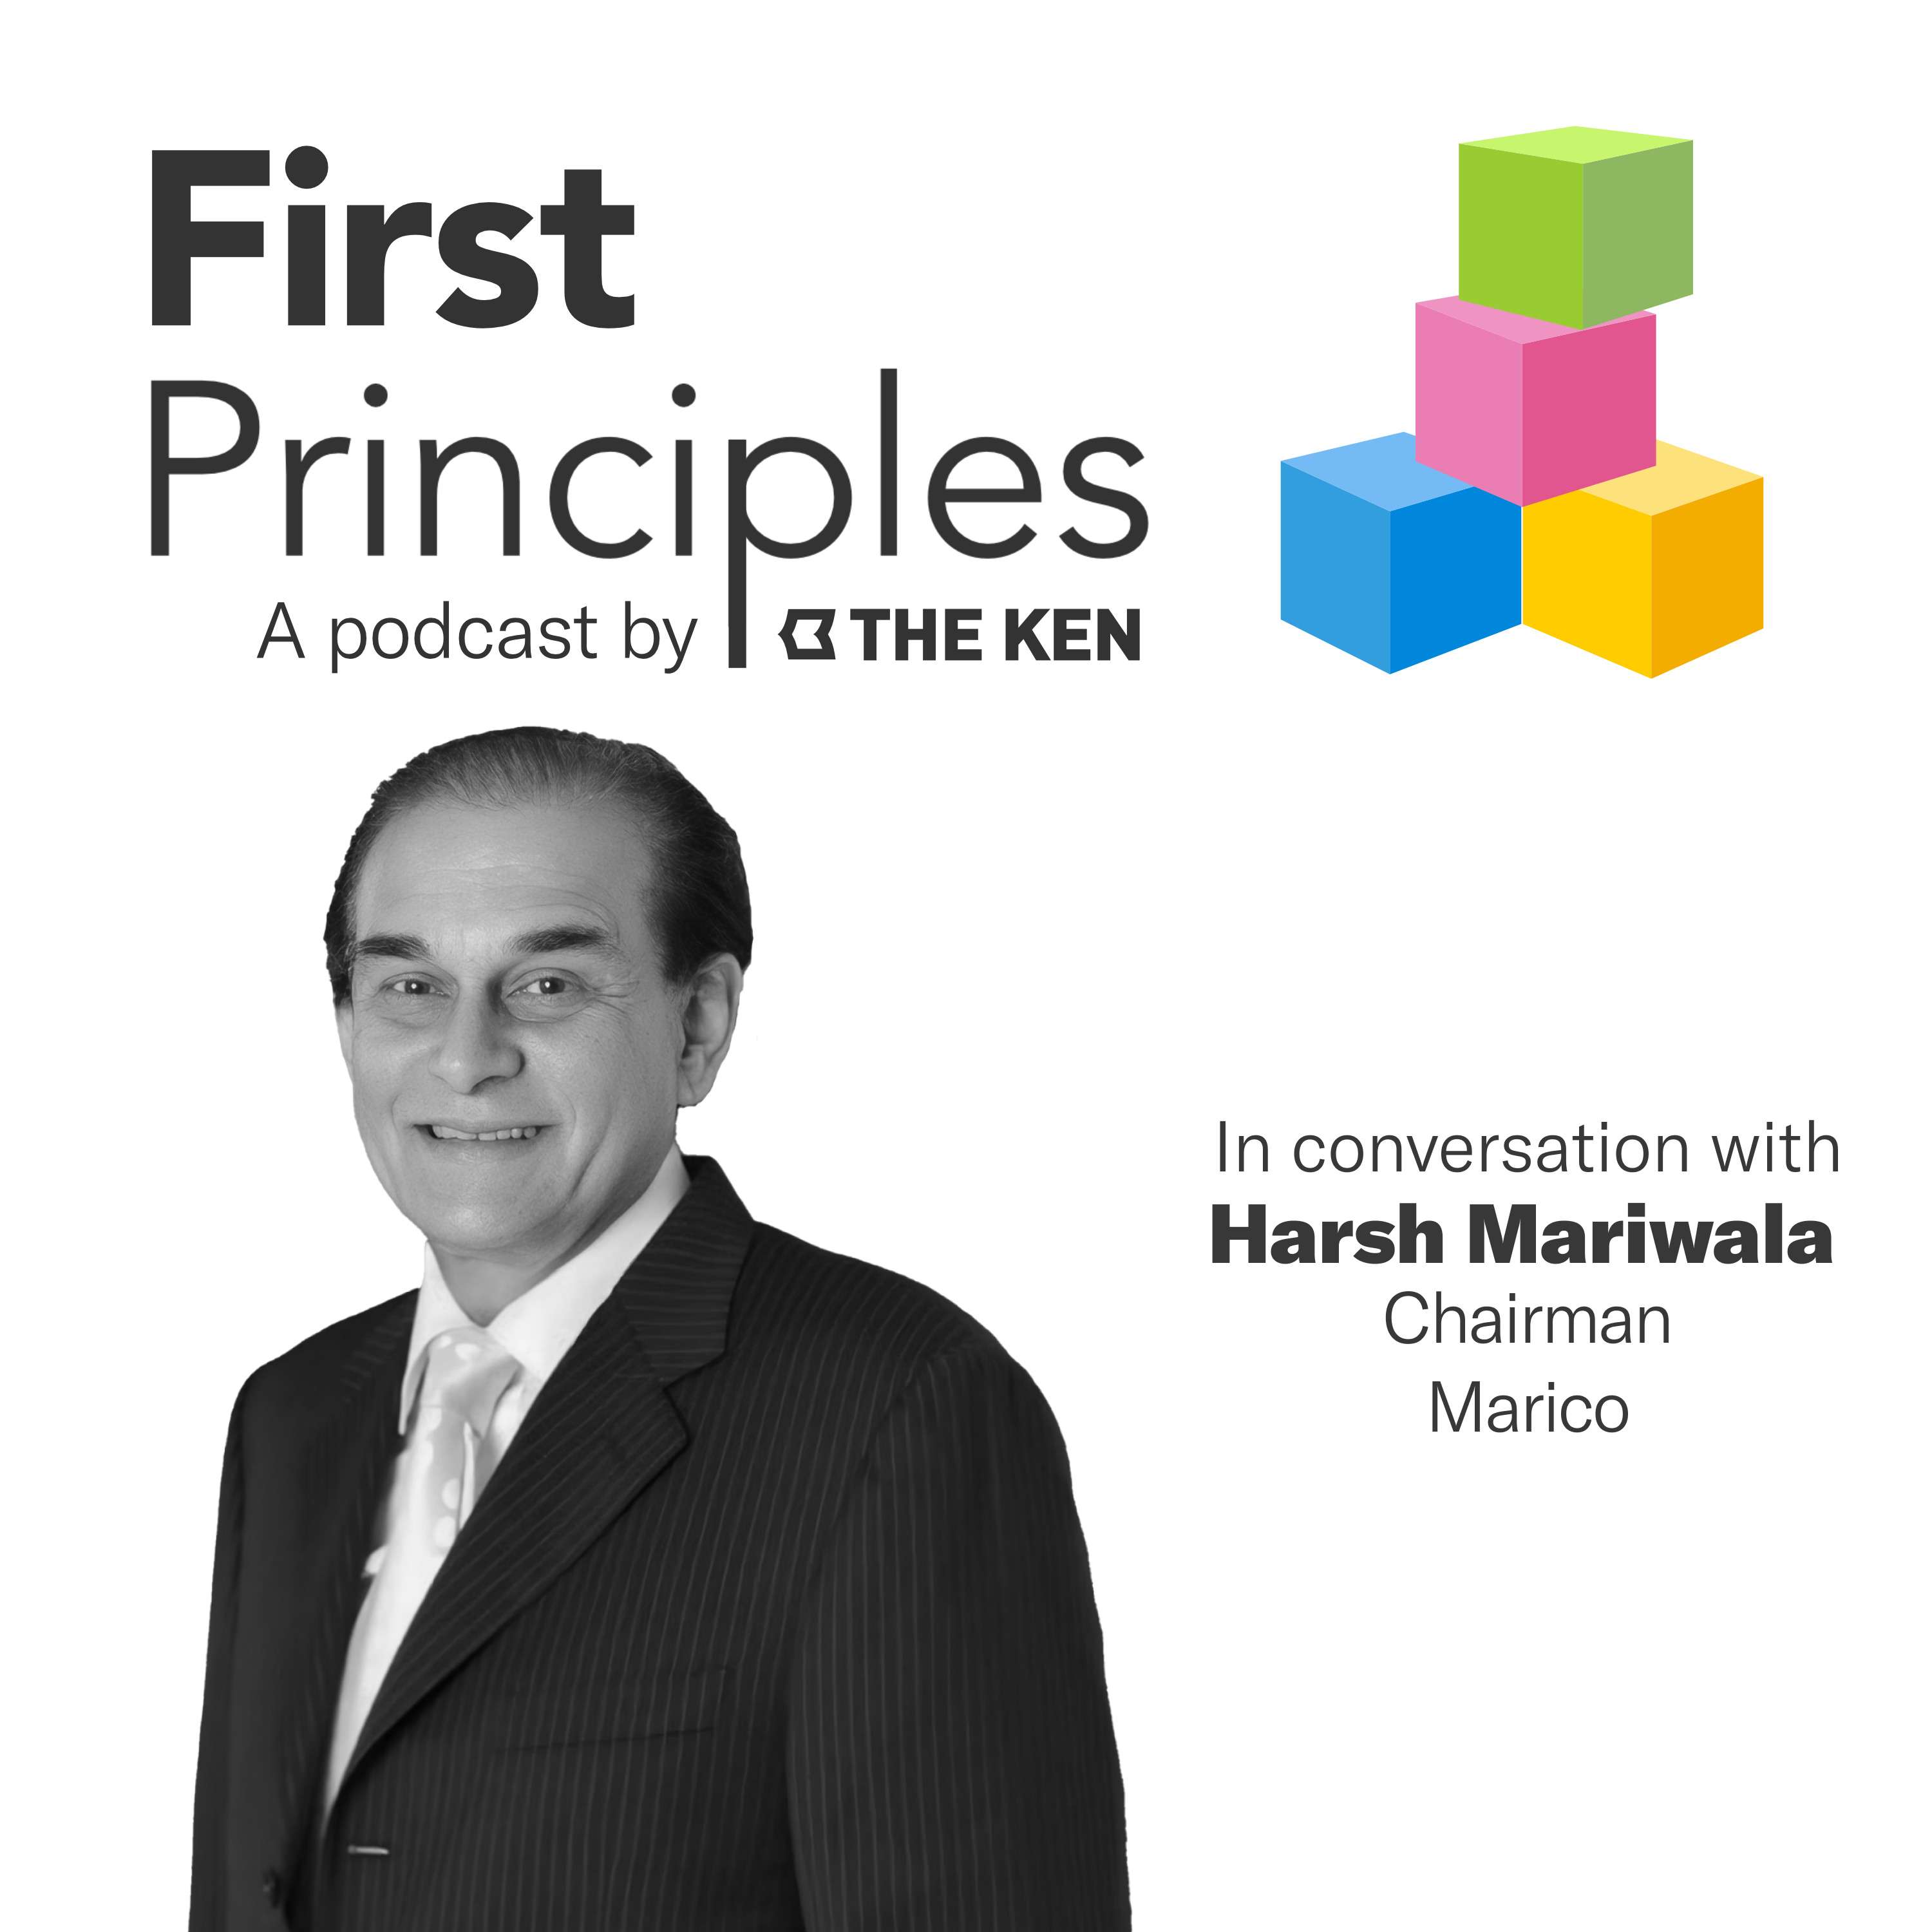 From Parachute to Saffola, Marico's Harsh Mariwala on building and branding India's biggest consumer products